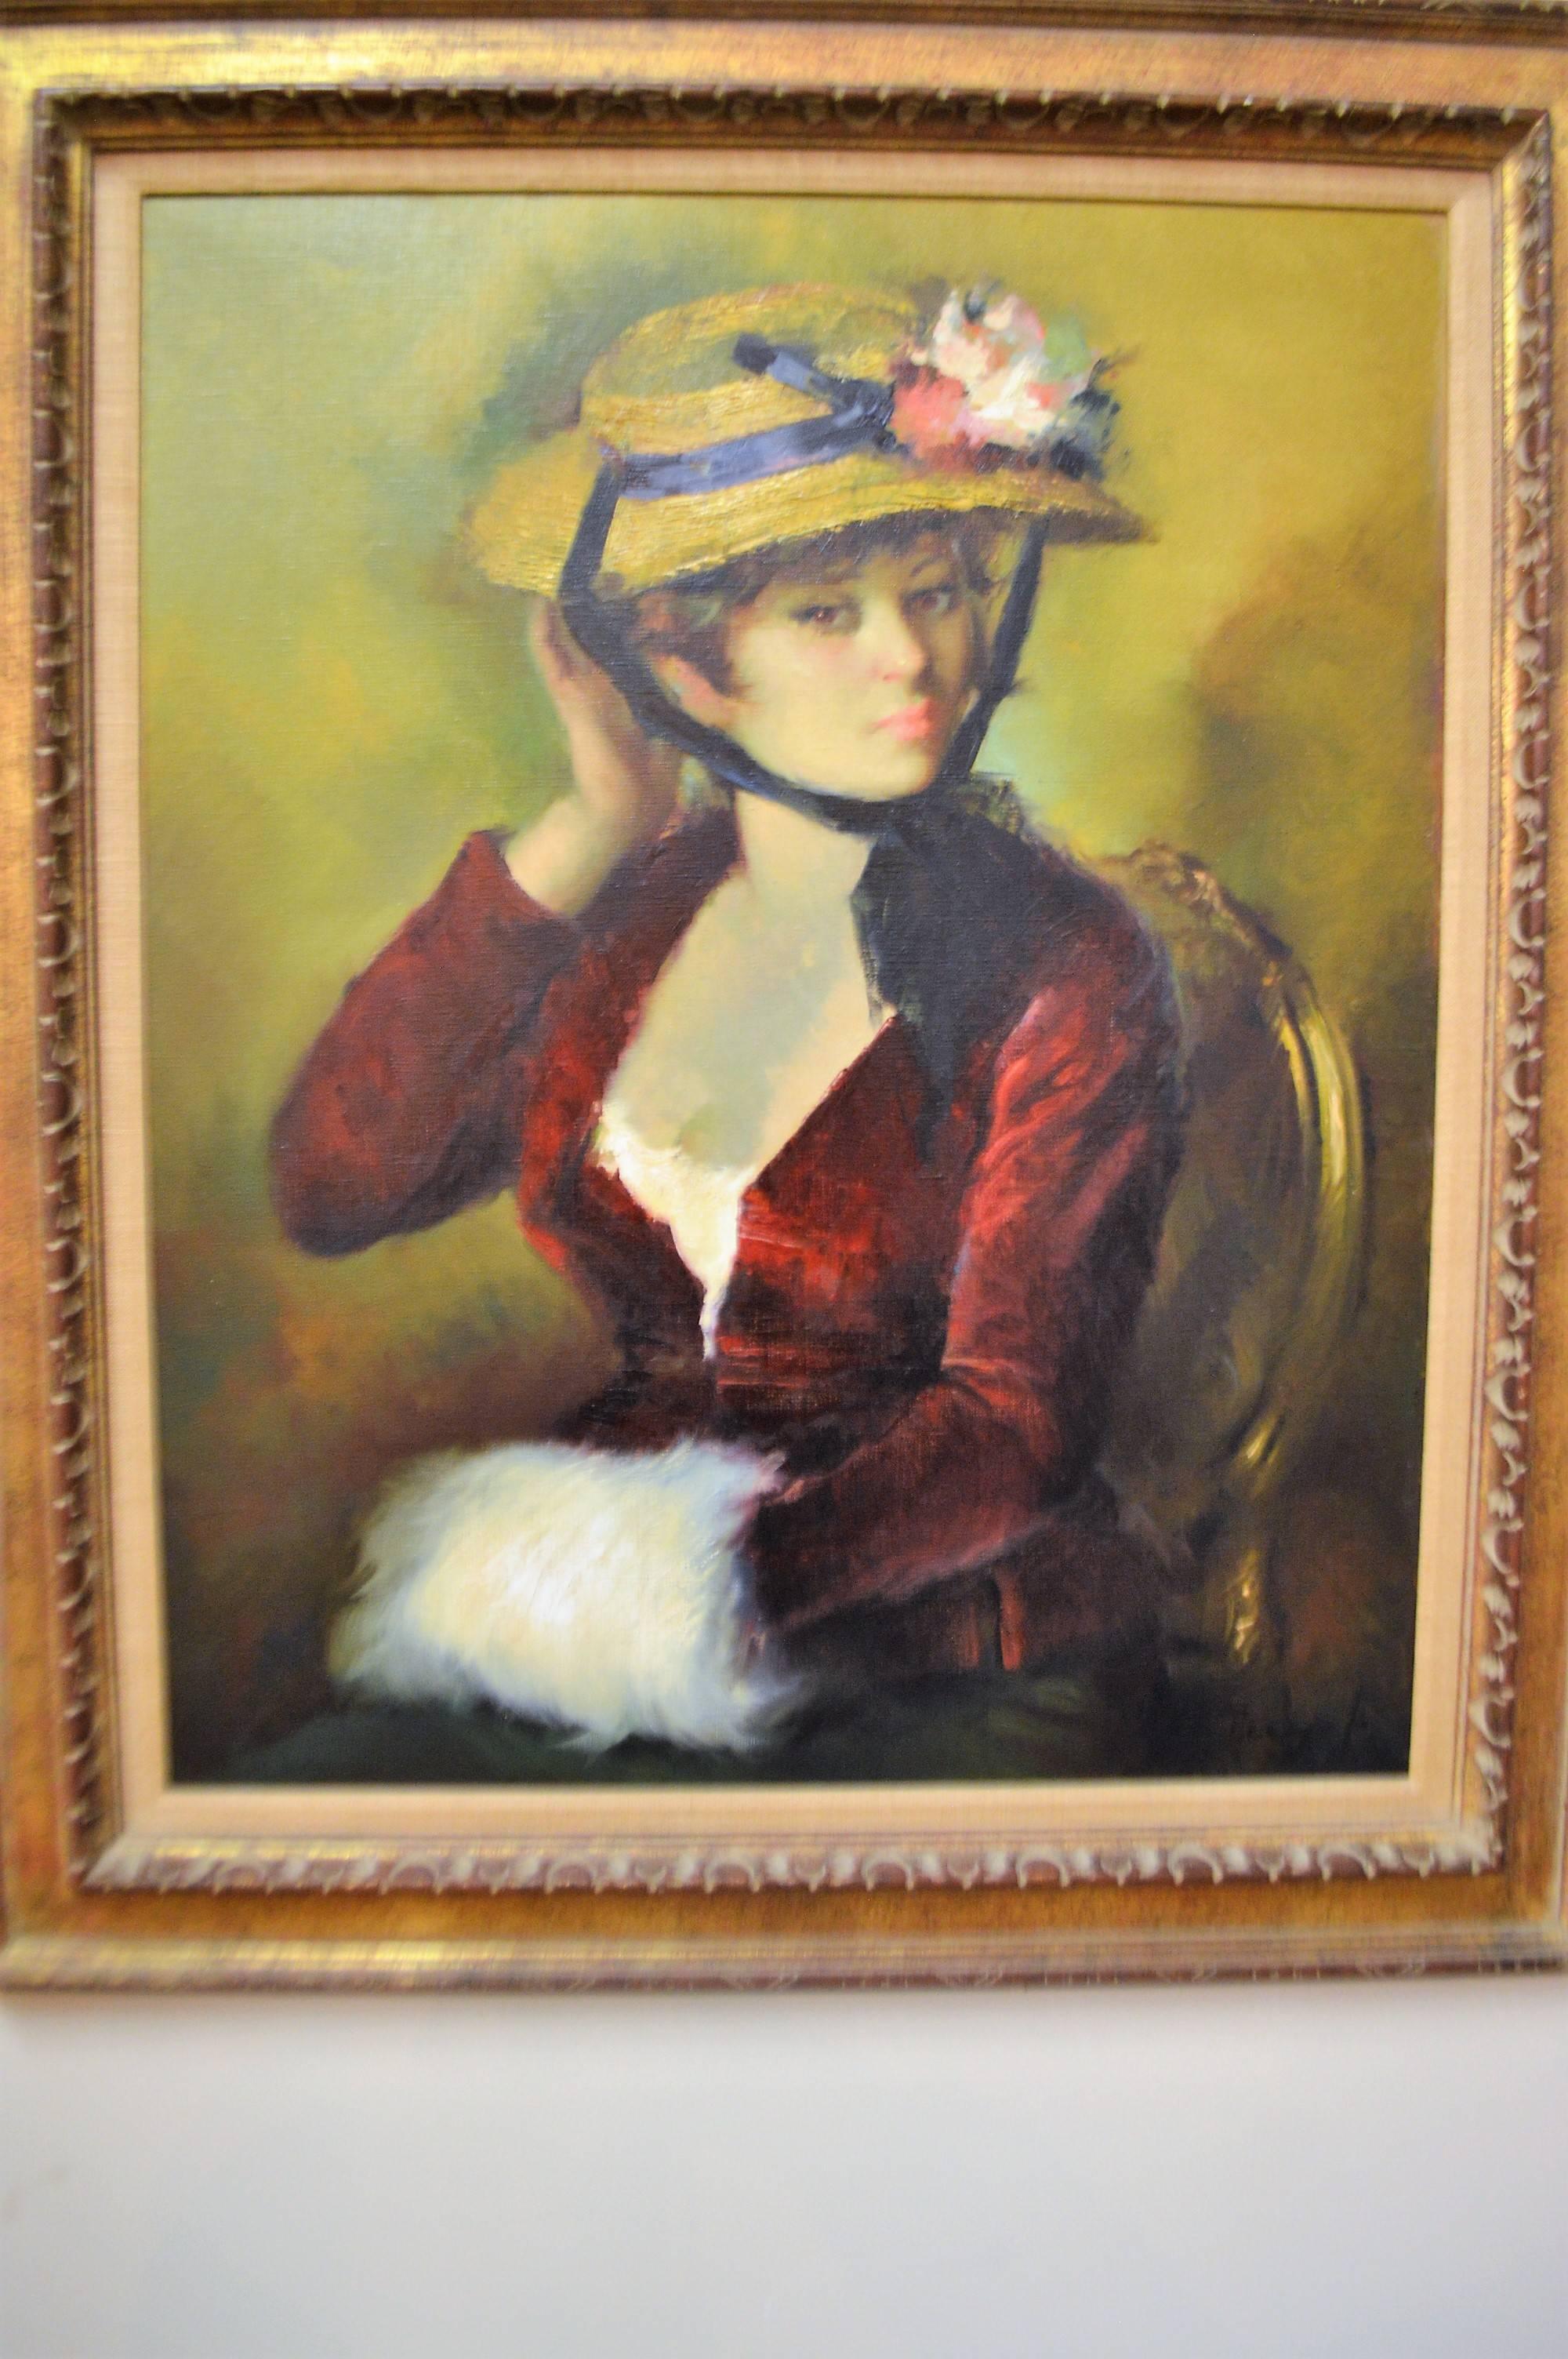 Charming and decorative oil painting of a pretty French woman wearing a straw hat.
The painting is sign on the right corner but illegible. The wooden frame is in good condition.